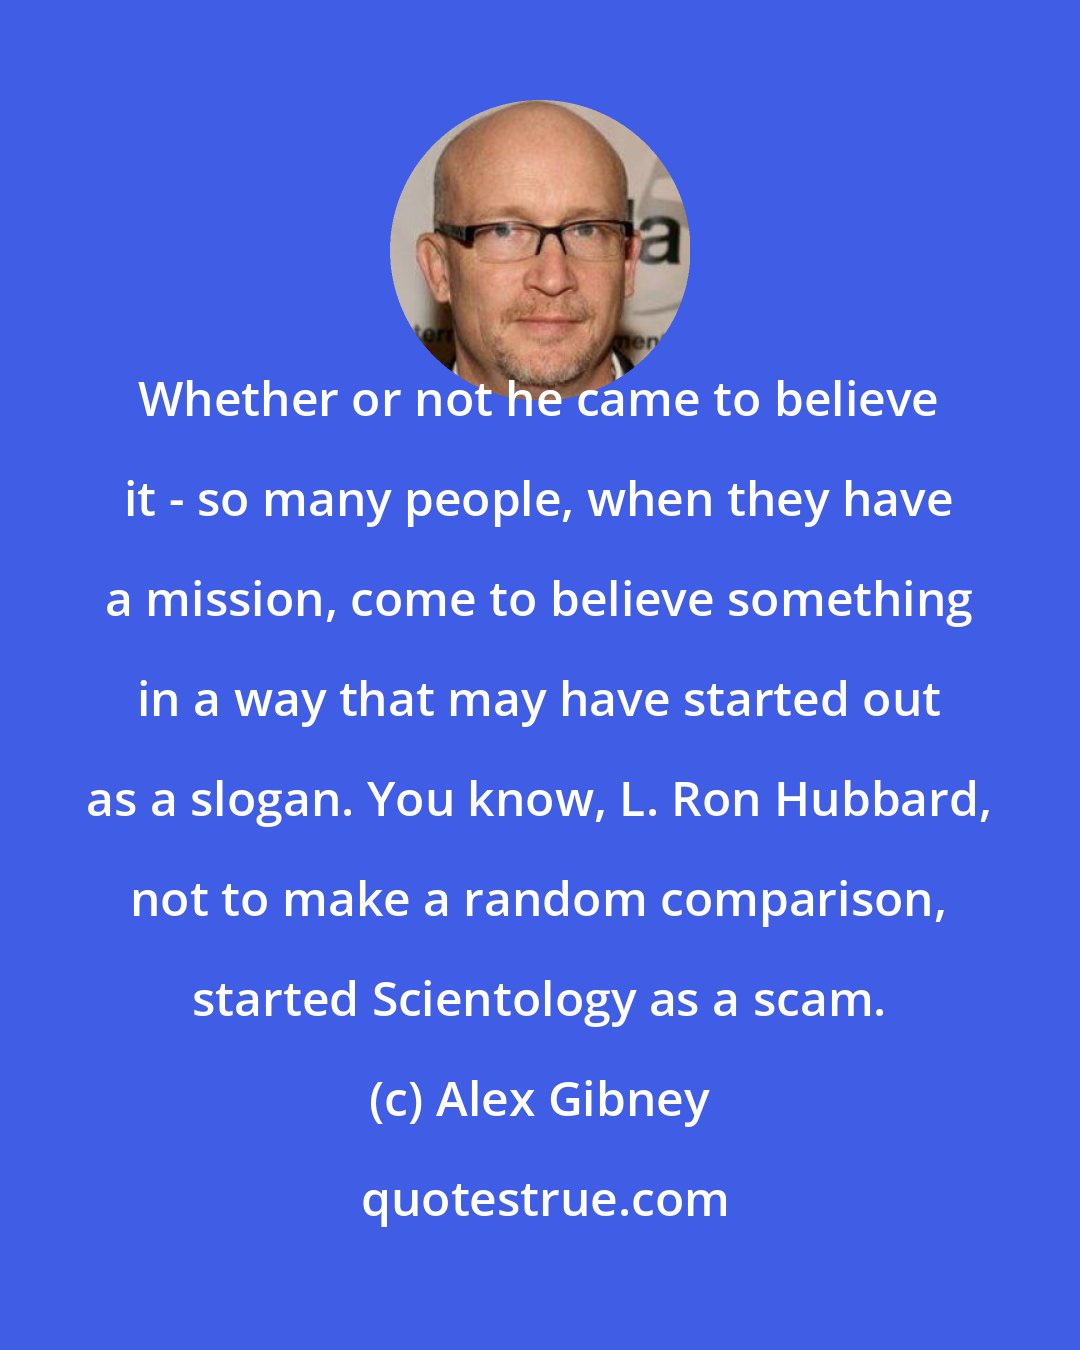 Alex Gibney: Whether or not he came to believe it - so many people, when they have a mission, come to believe something in a way that may have started out as a slogan. You know, L. Ron Hubbard, not to make a random comparison, started Scientology as a scam.